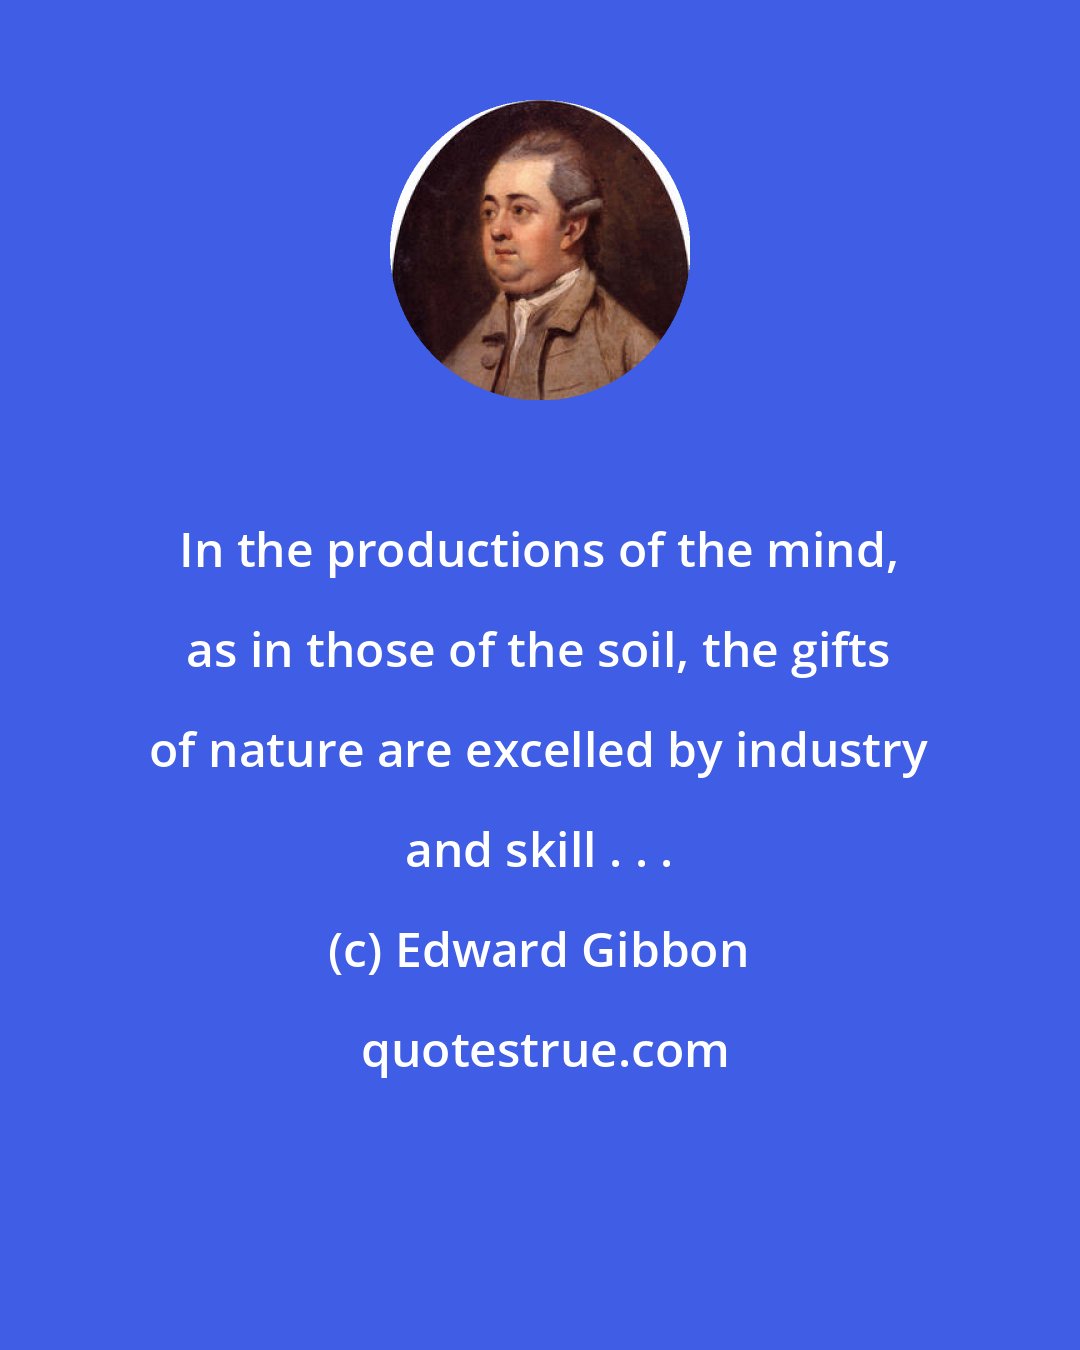 Edward Gibbon: In the productions of the mind, as in those of the soil, the gifts of nature are excelled by industry and skill . . .